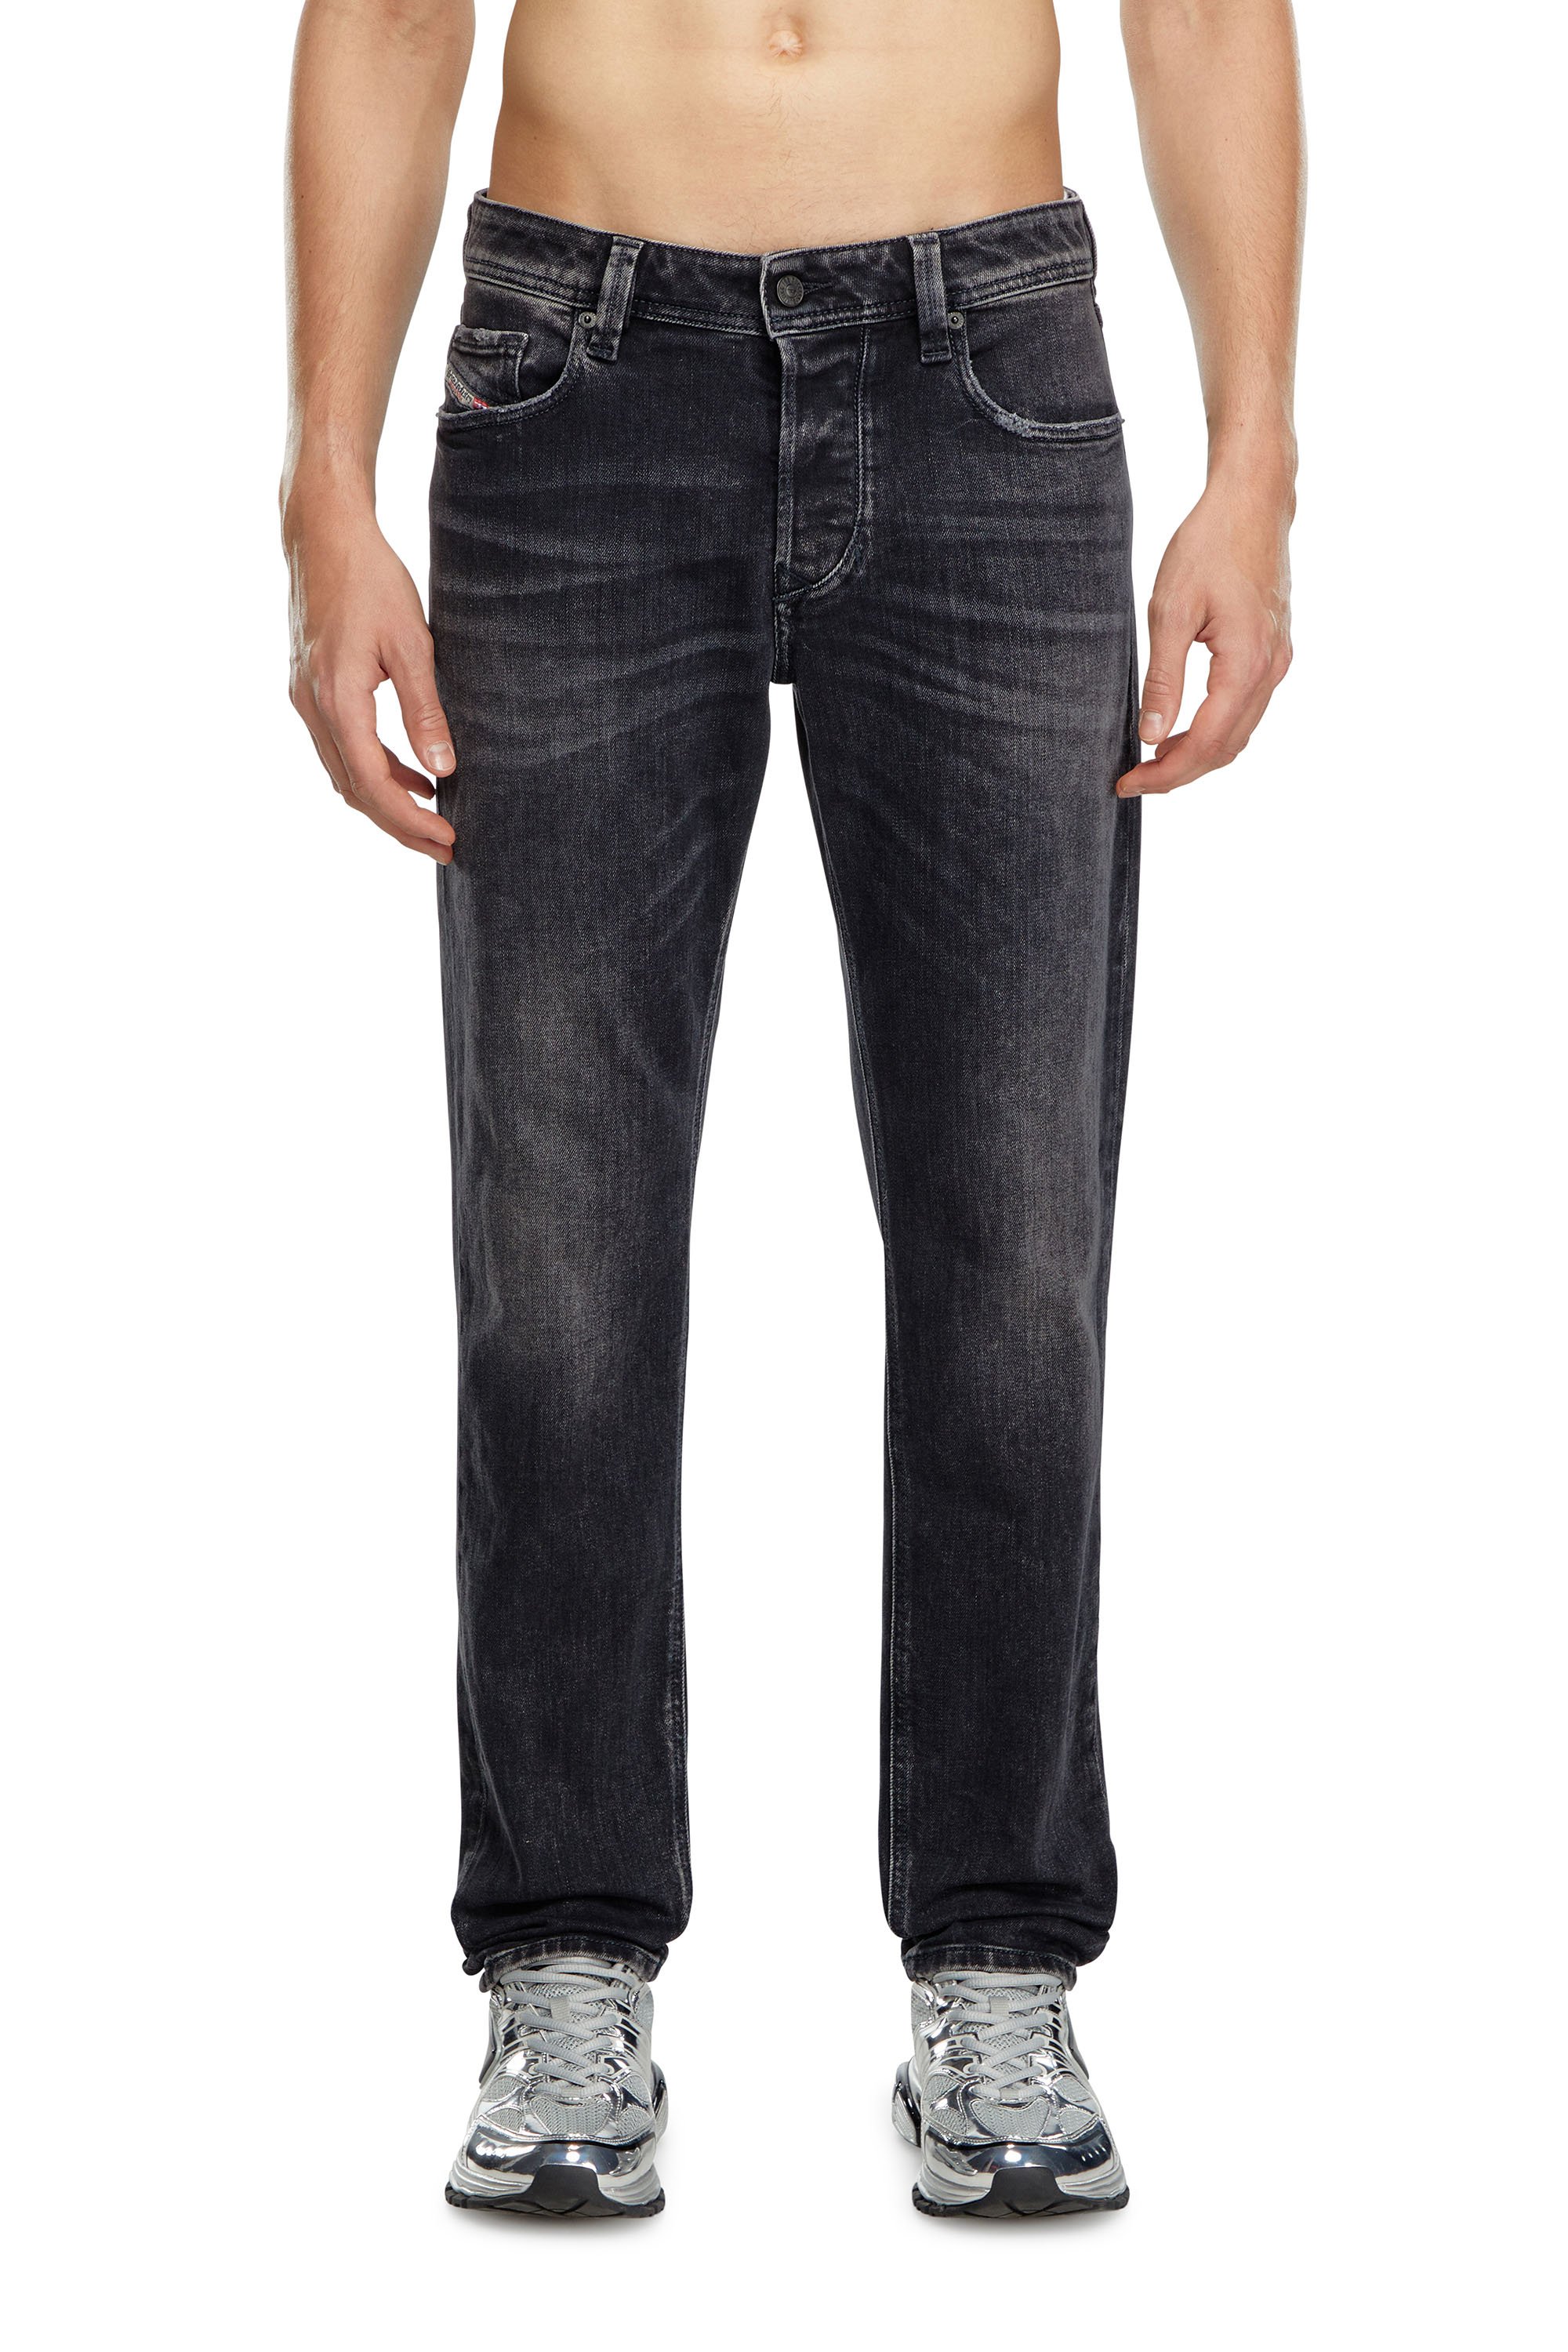 Diesel - Tapered Jeans 1986 Larkee-Beex 09K51, Hombre Tapered Jeans - 1986 Larkee-Beex in Negro - Image 1